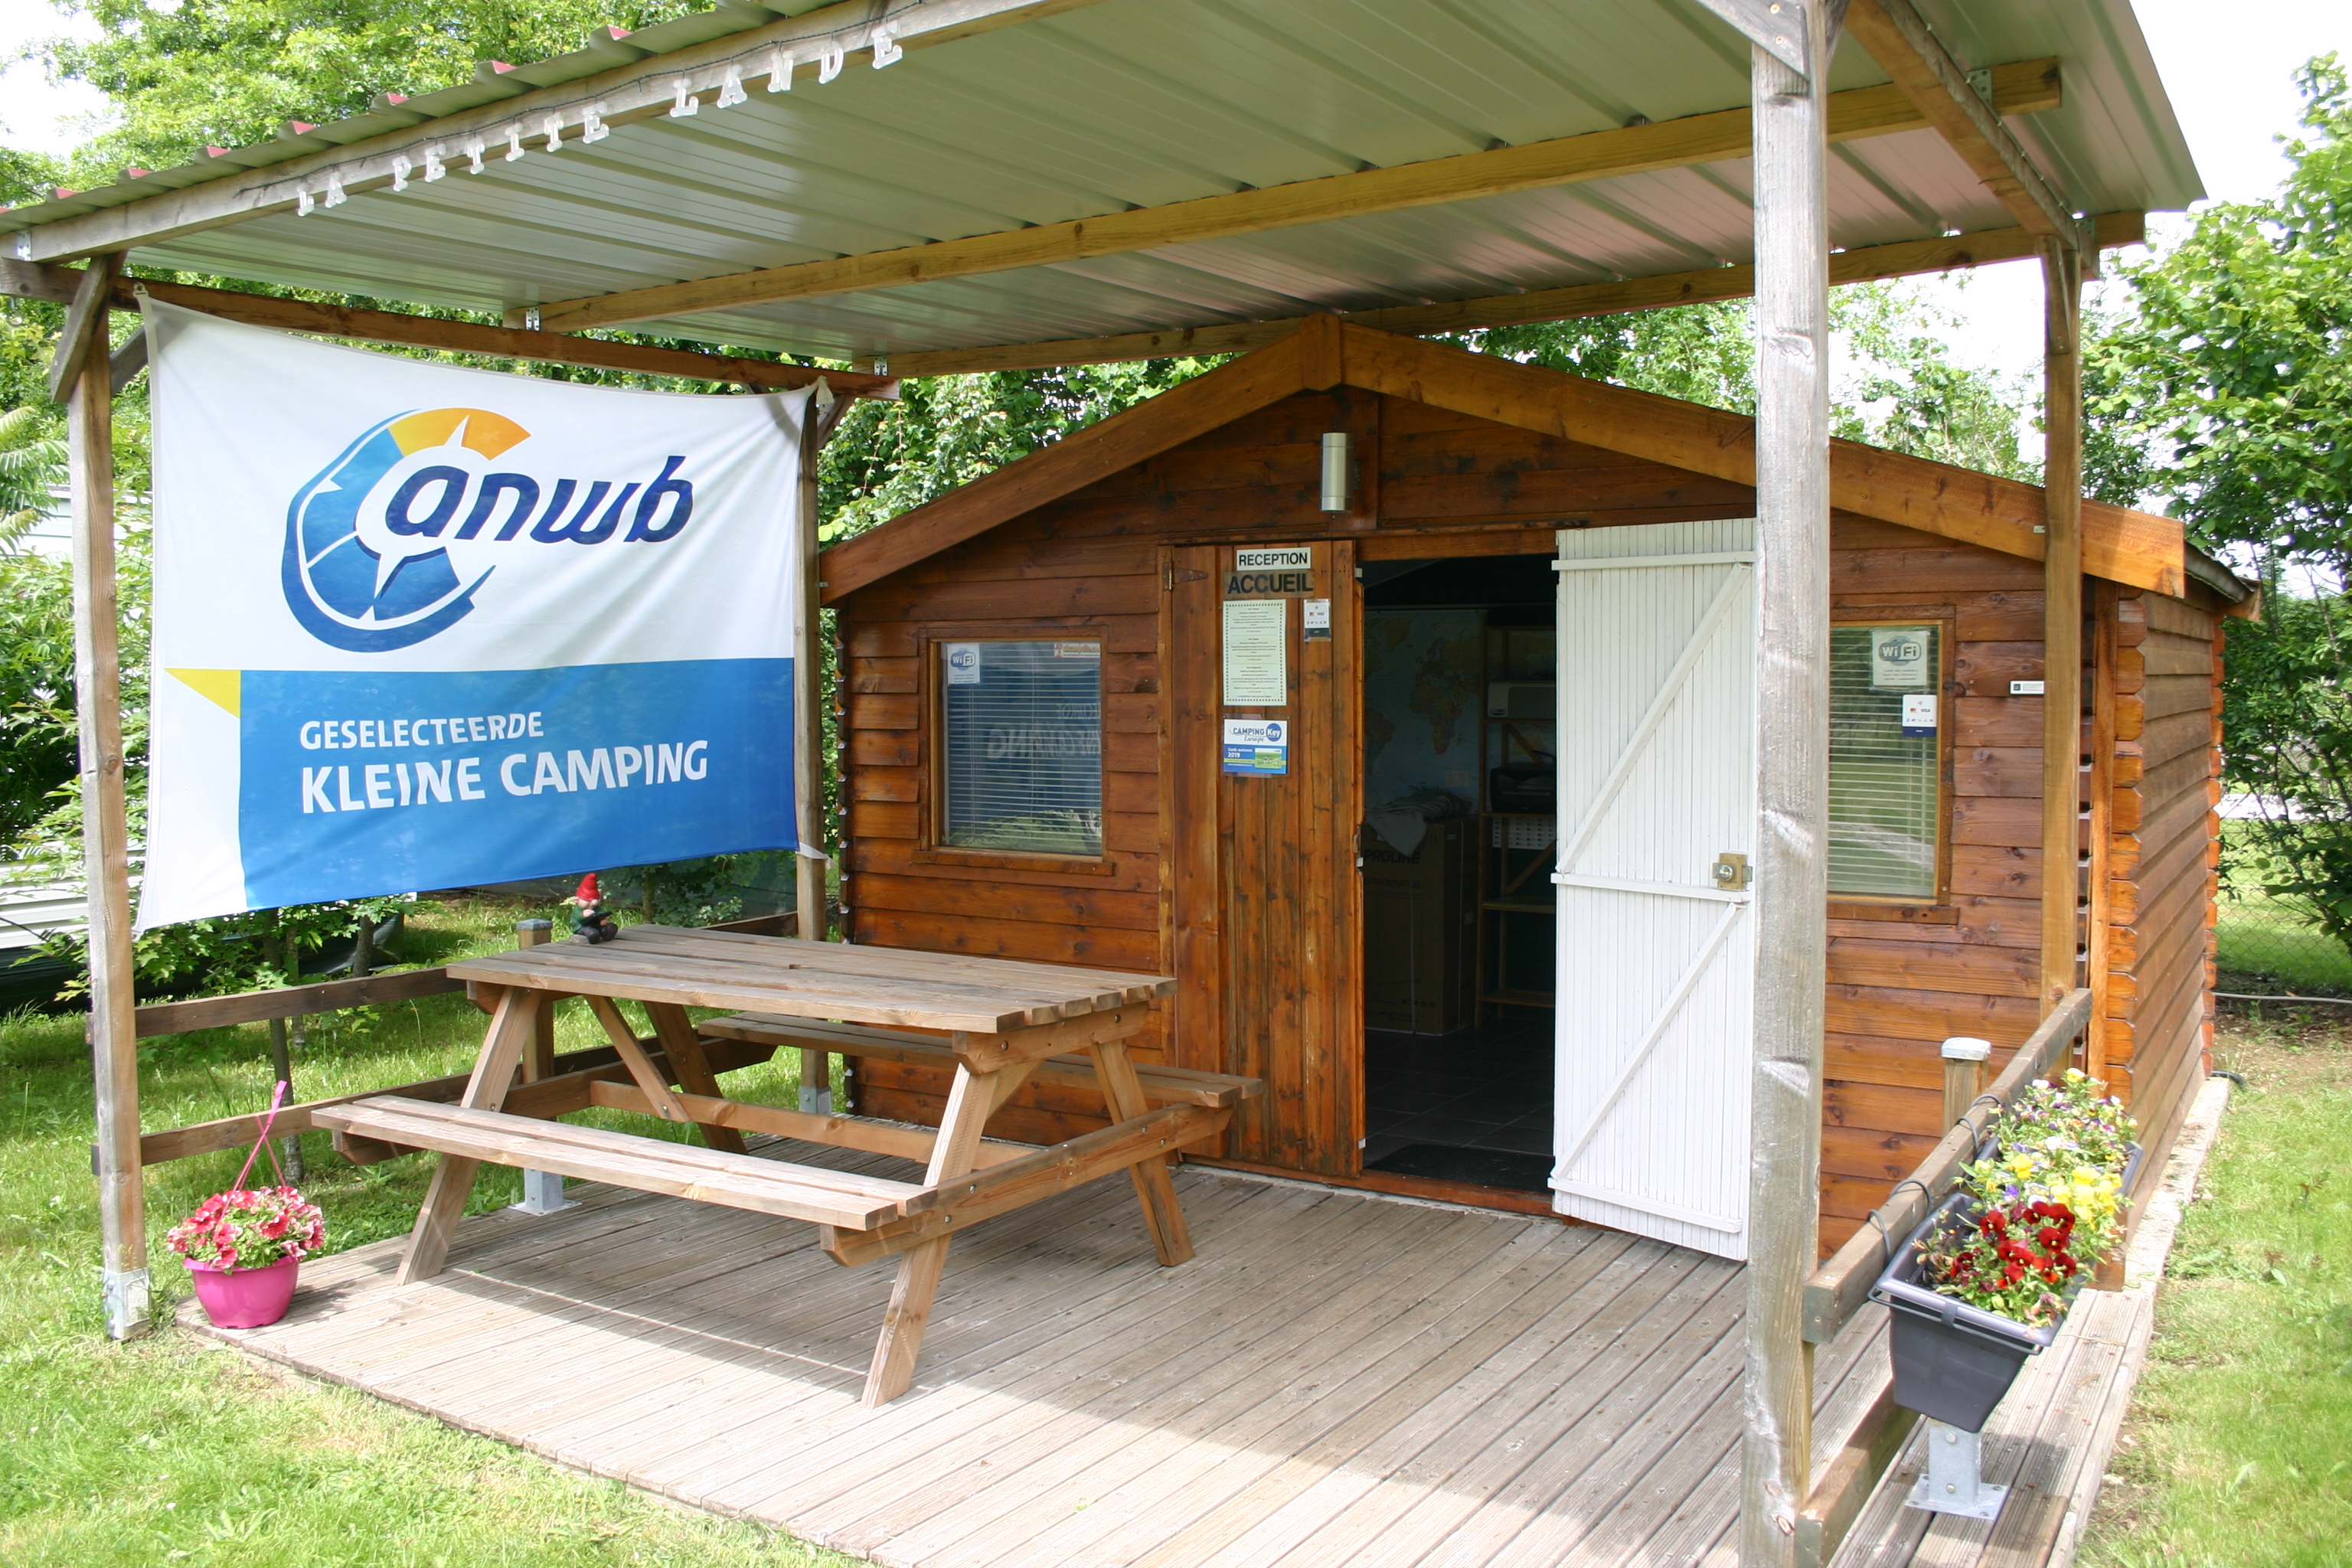 6 Emplacements De Camping Sur Herbe - Thiviers